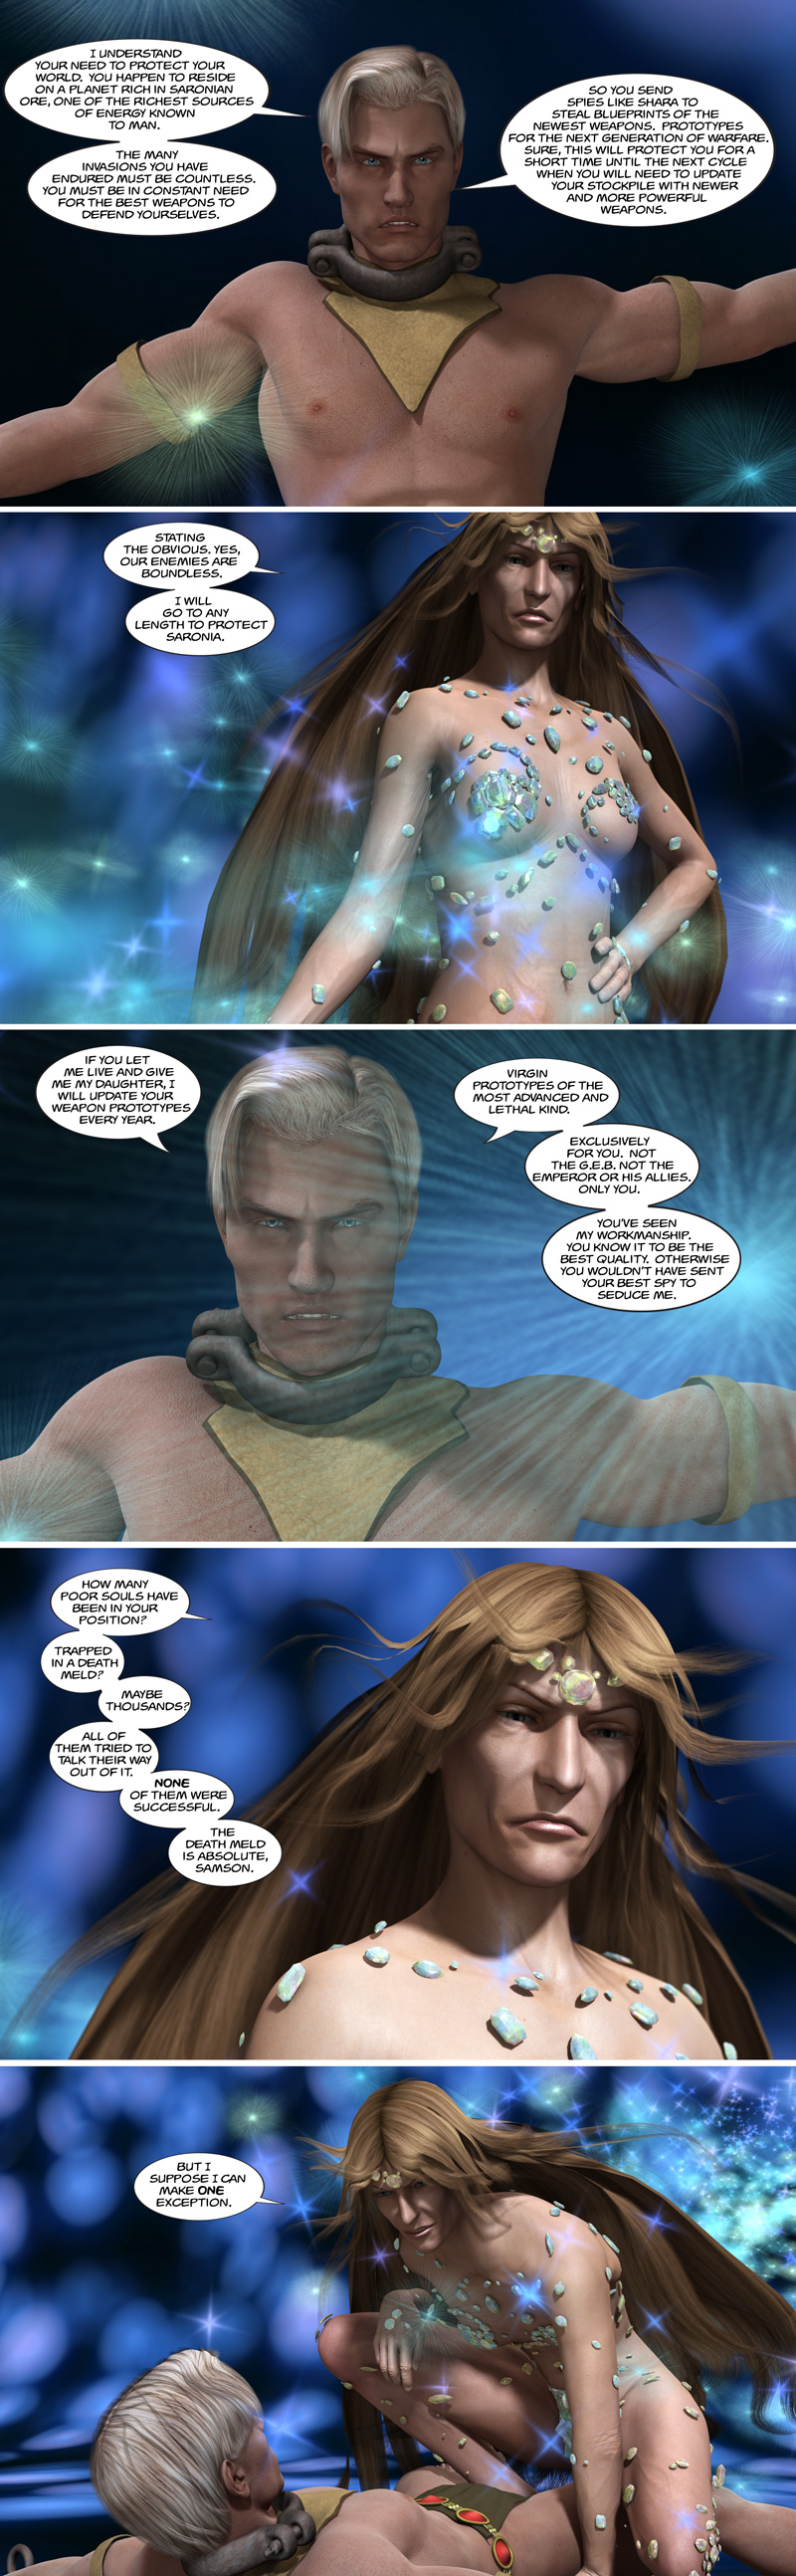 Chapter 12, page 7